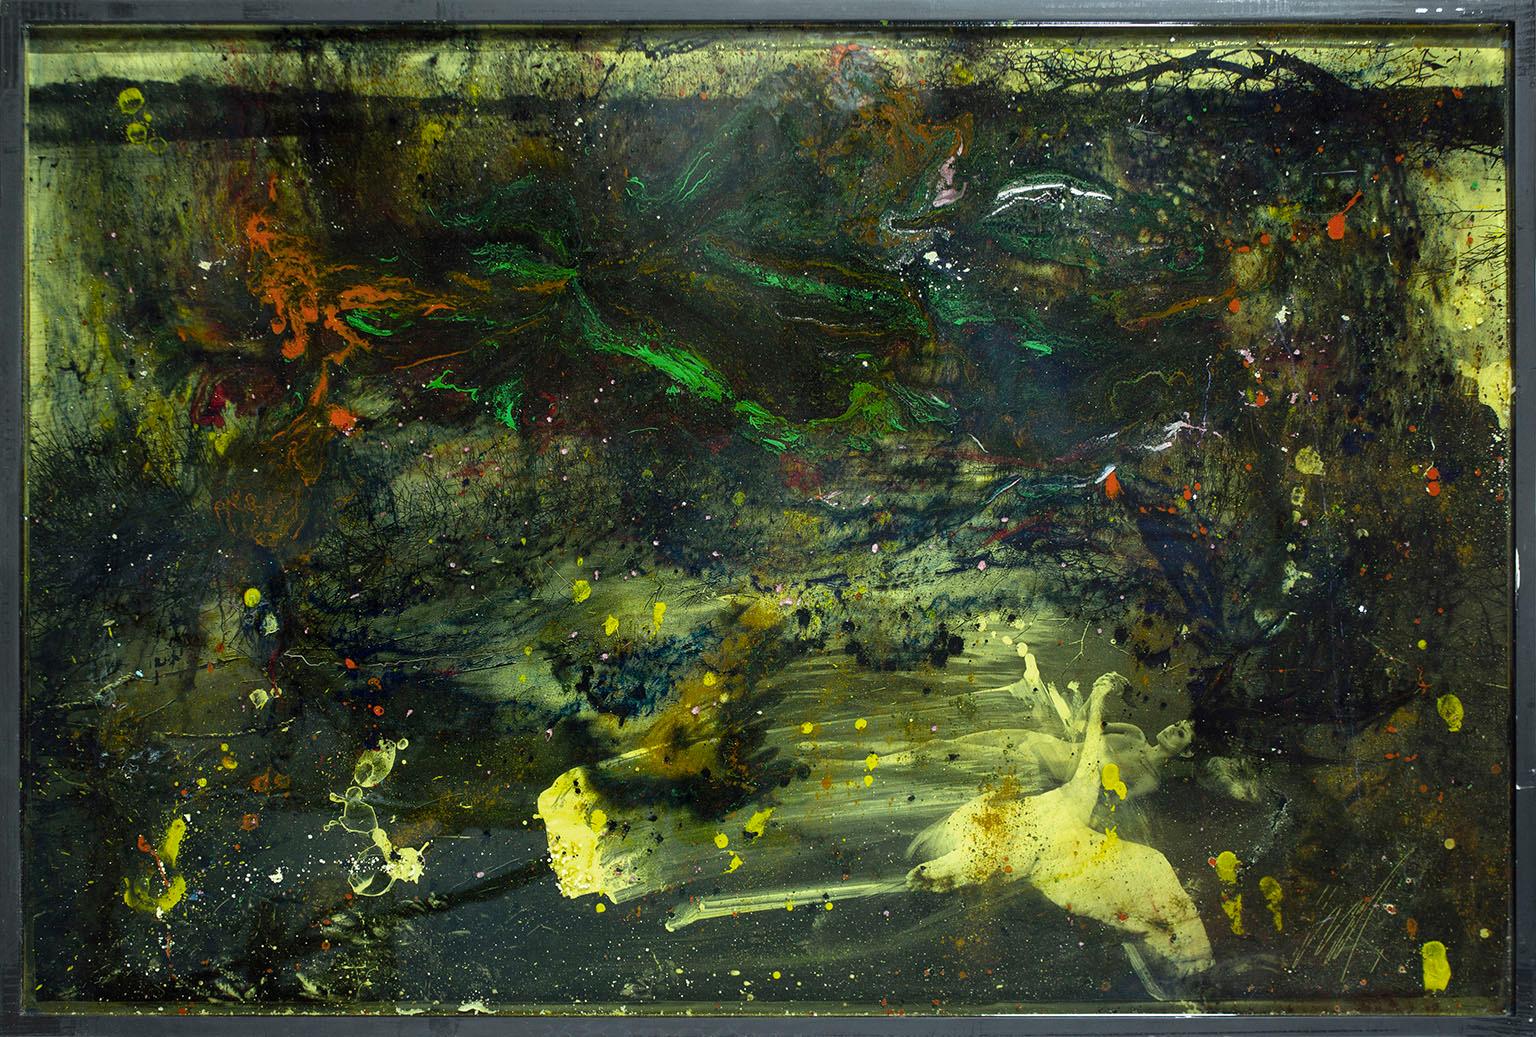 Raphael Mazzucco Nude Print - "Hidden Lake" diamond-dusted archival print and mixed media encased in resin